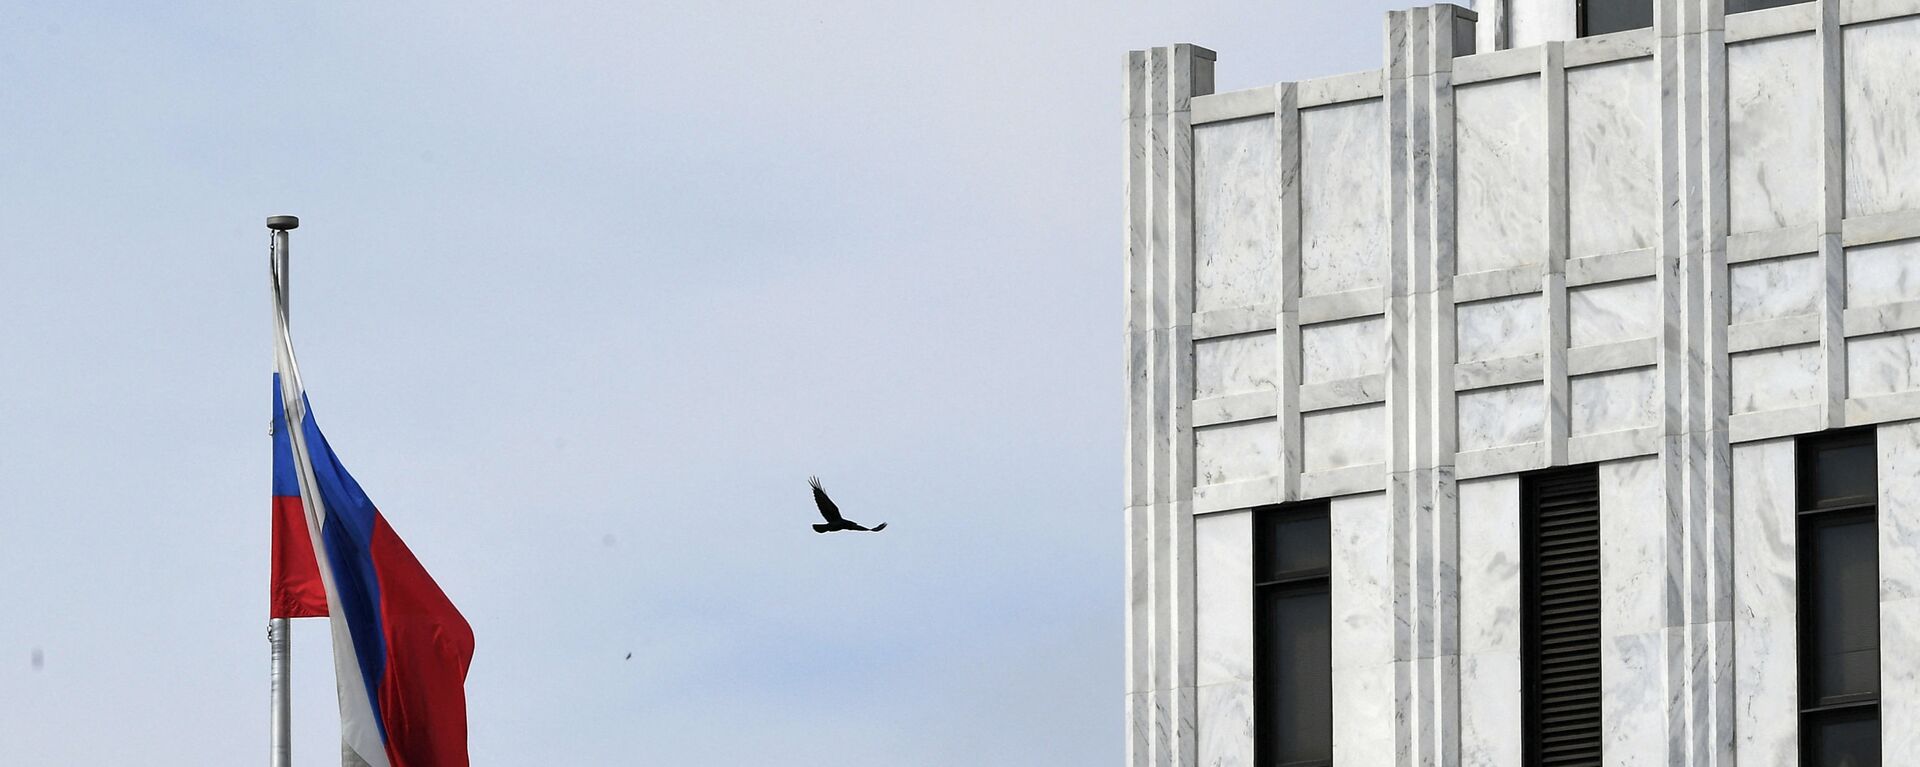 A bird flies past a Russian flag at the Embassy of Russia in Washington, DC on April 15, 2021. - Sputnik International, 1920, 29.11.2022